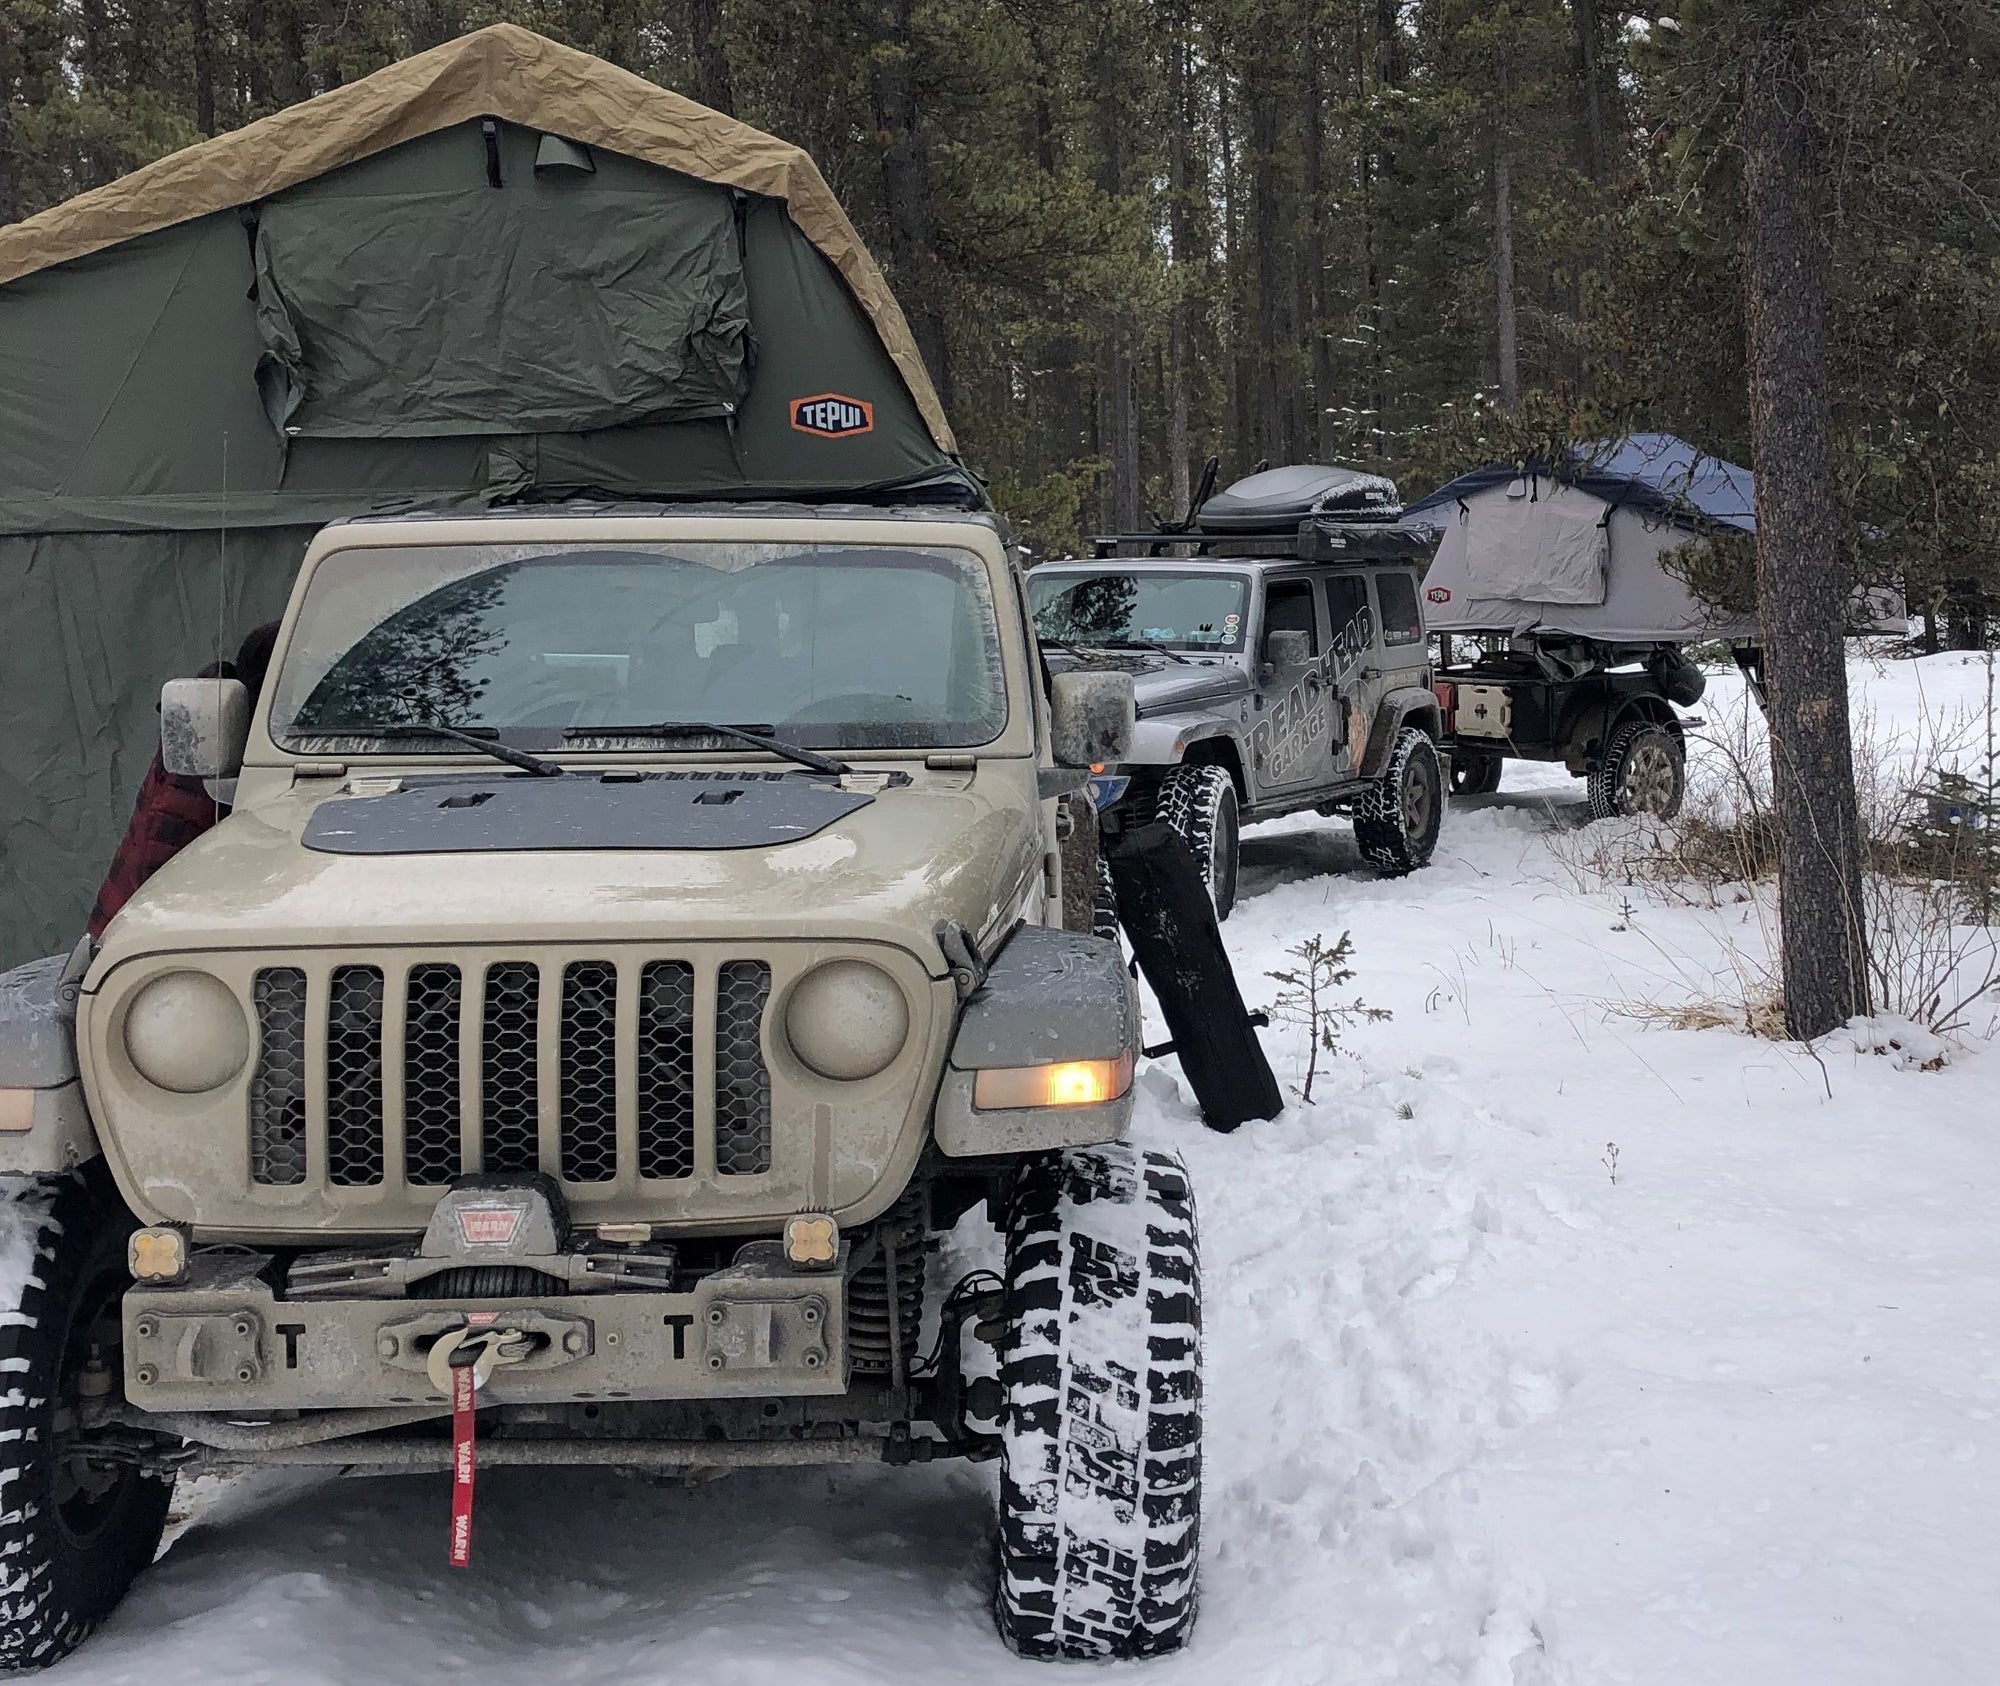 Is it camping or overlanding? Could it be both?